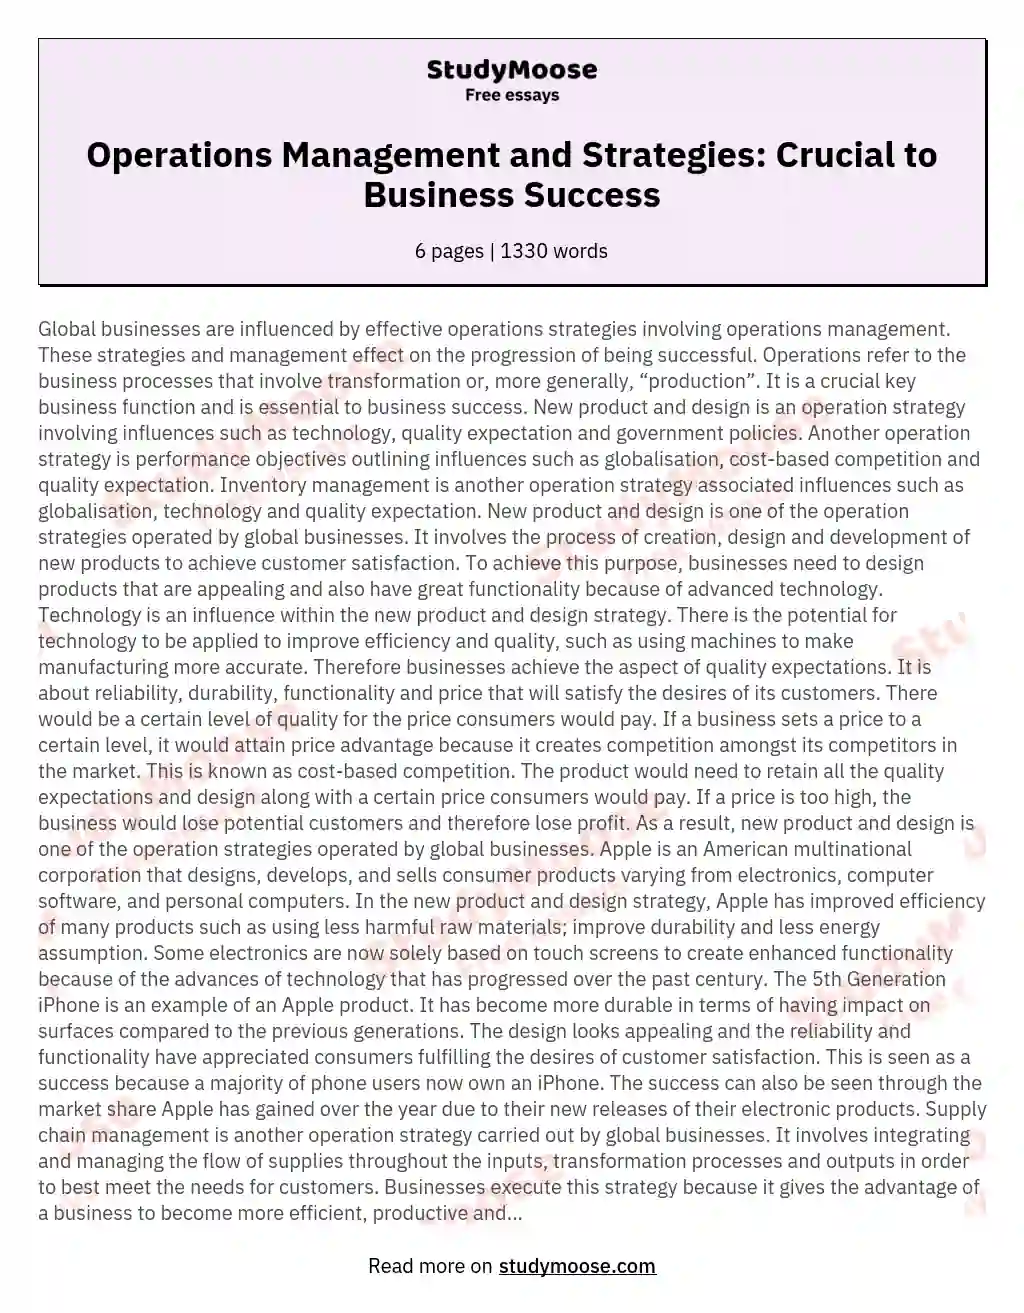 Operations Management and Strategies: Crucial to Business Success